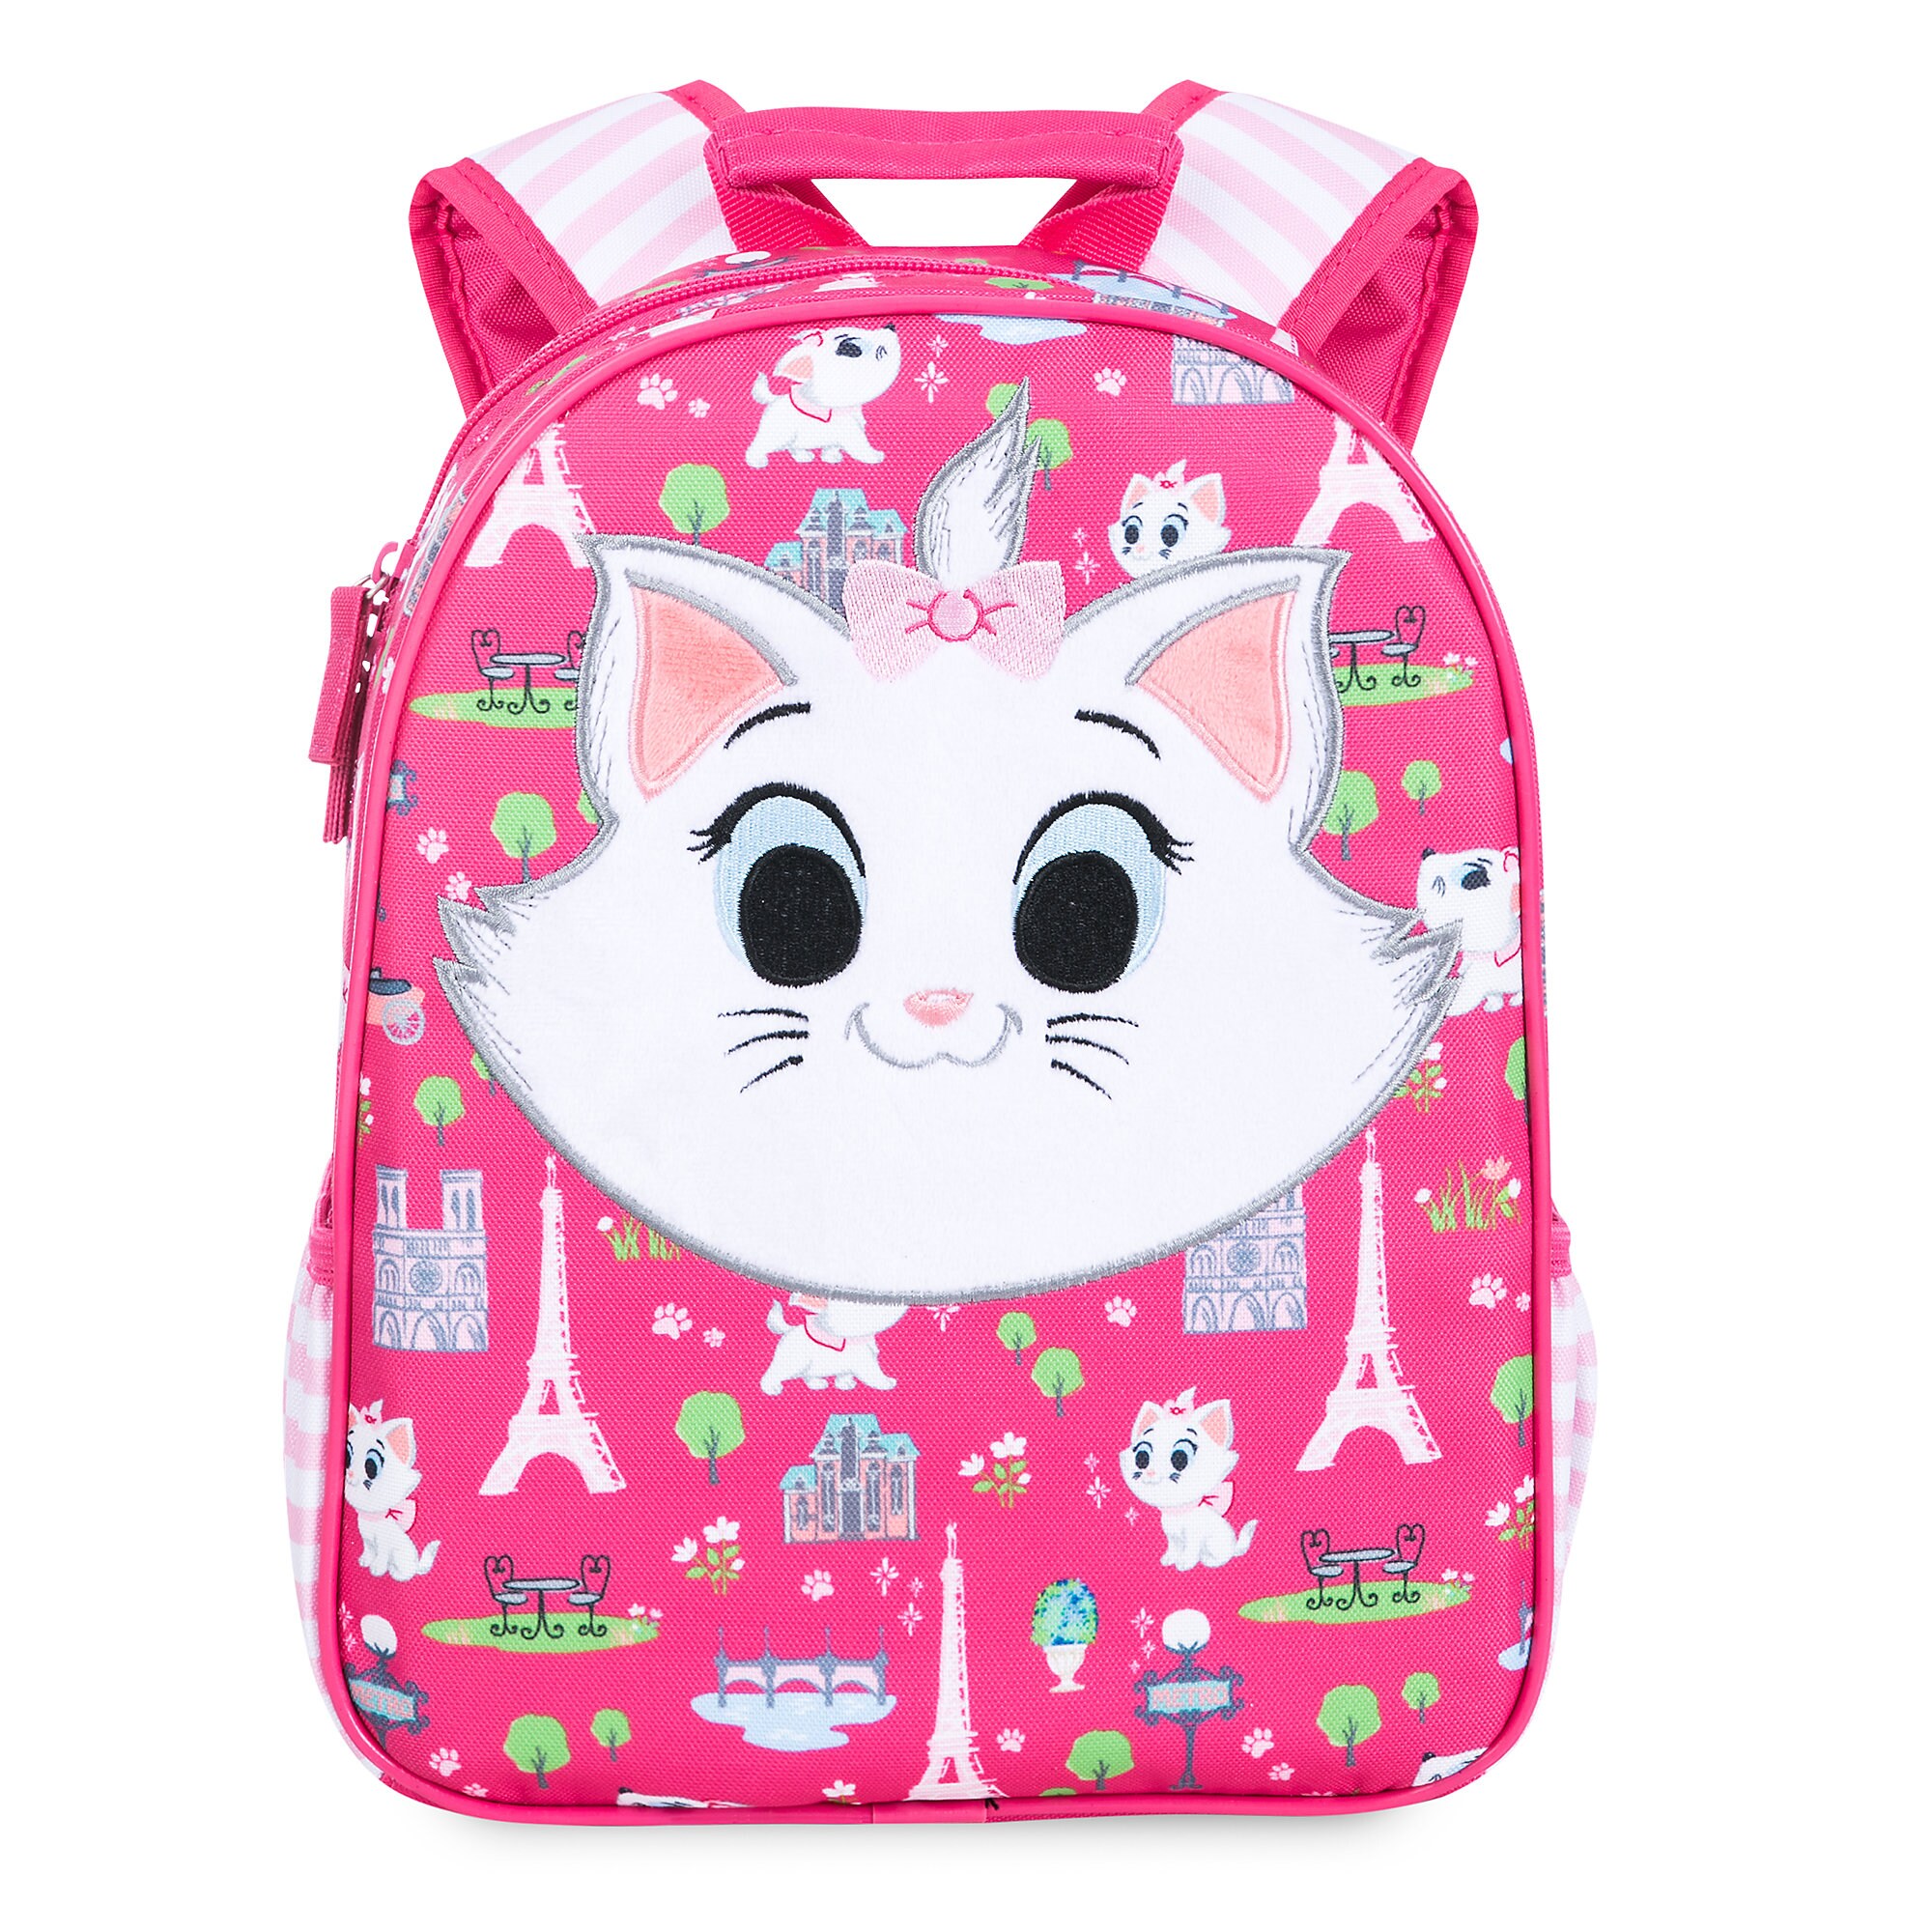 Marie Backpack for Kids - Personalized